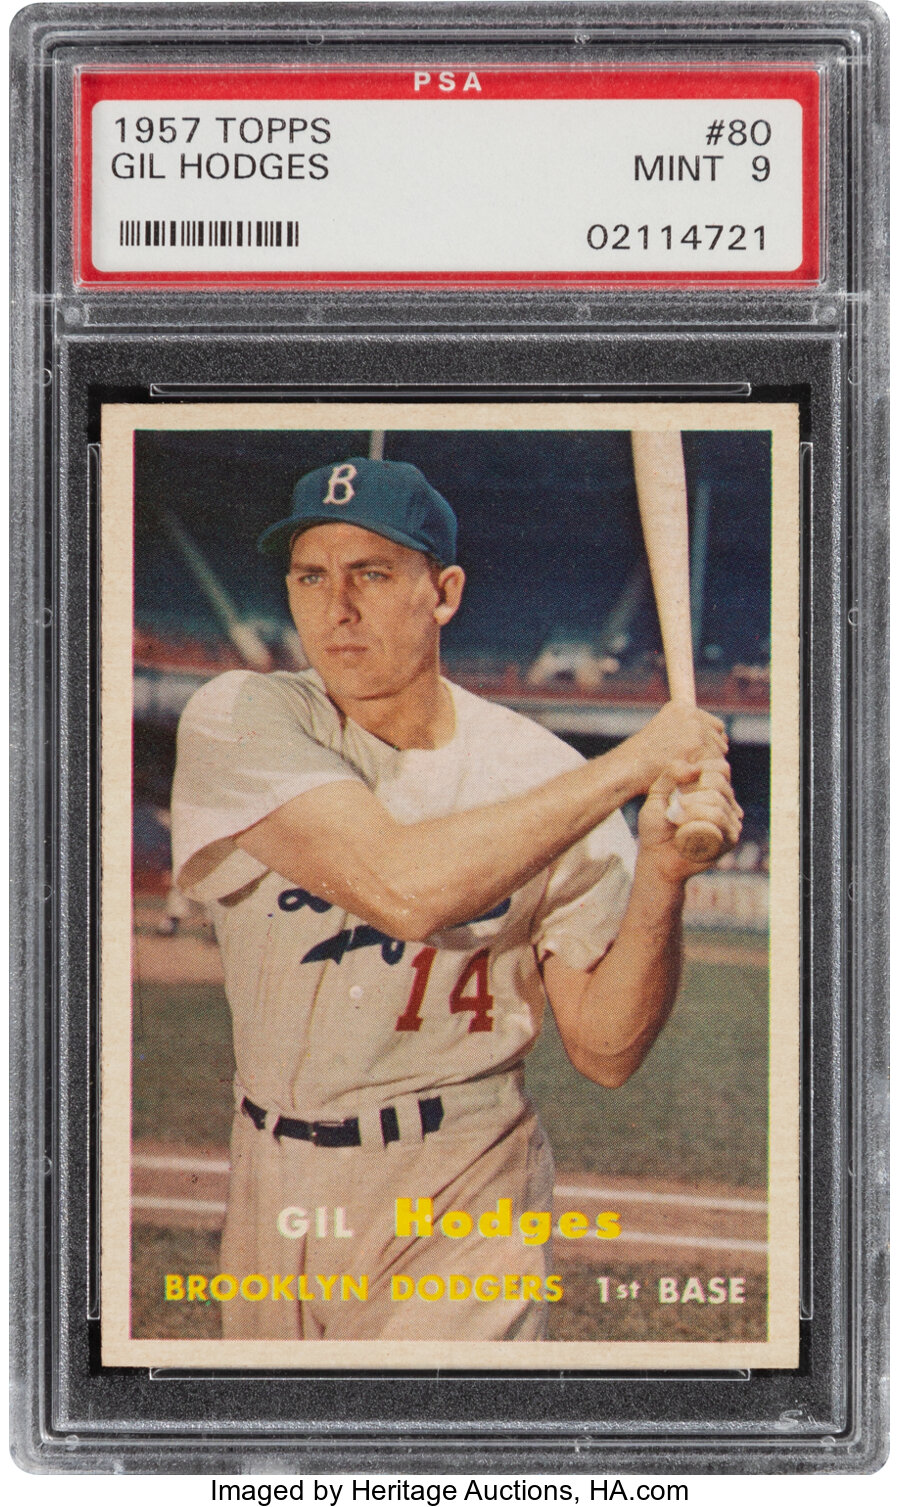 1957 Topps Gil Hodges #80 PSA Mint 9 - Only One Higher